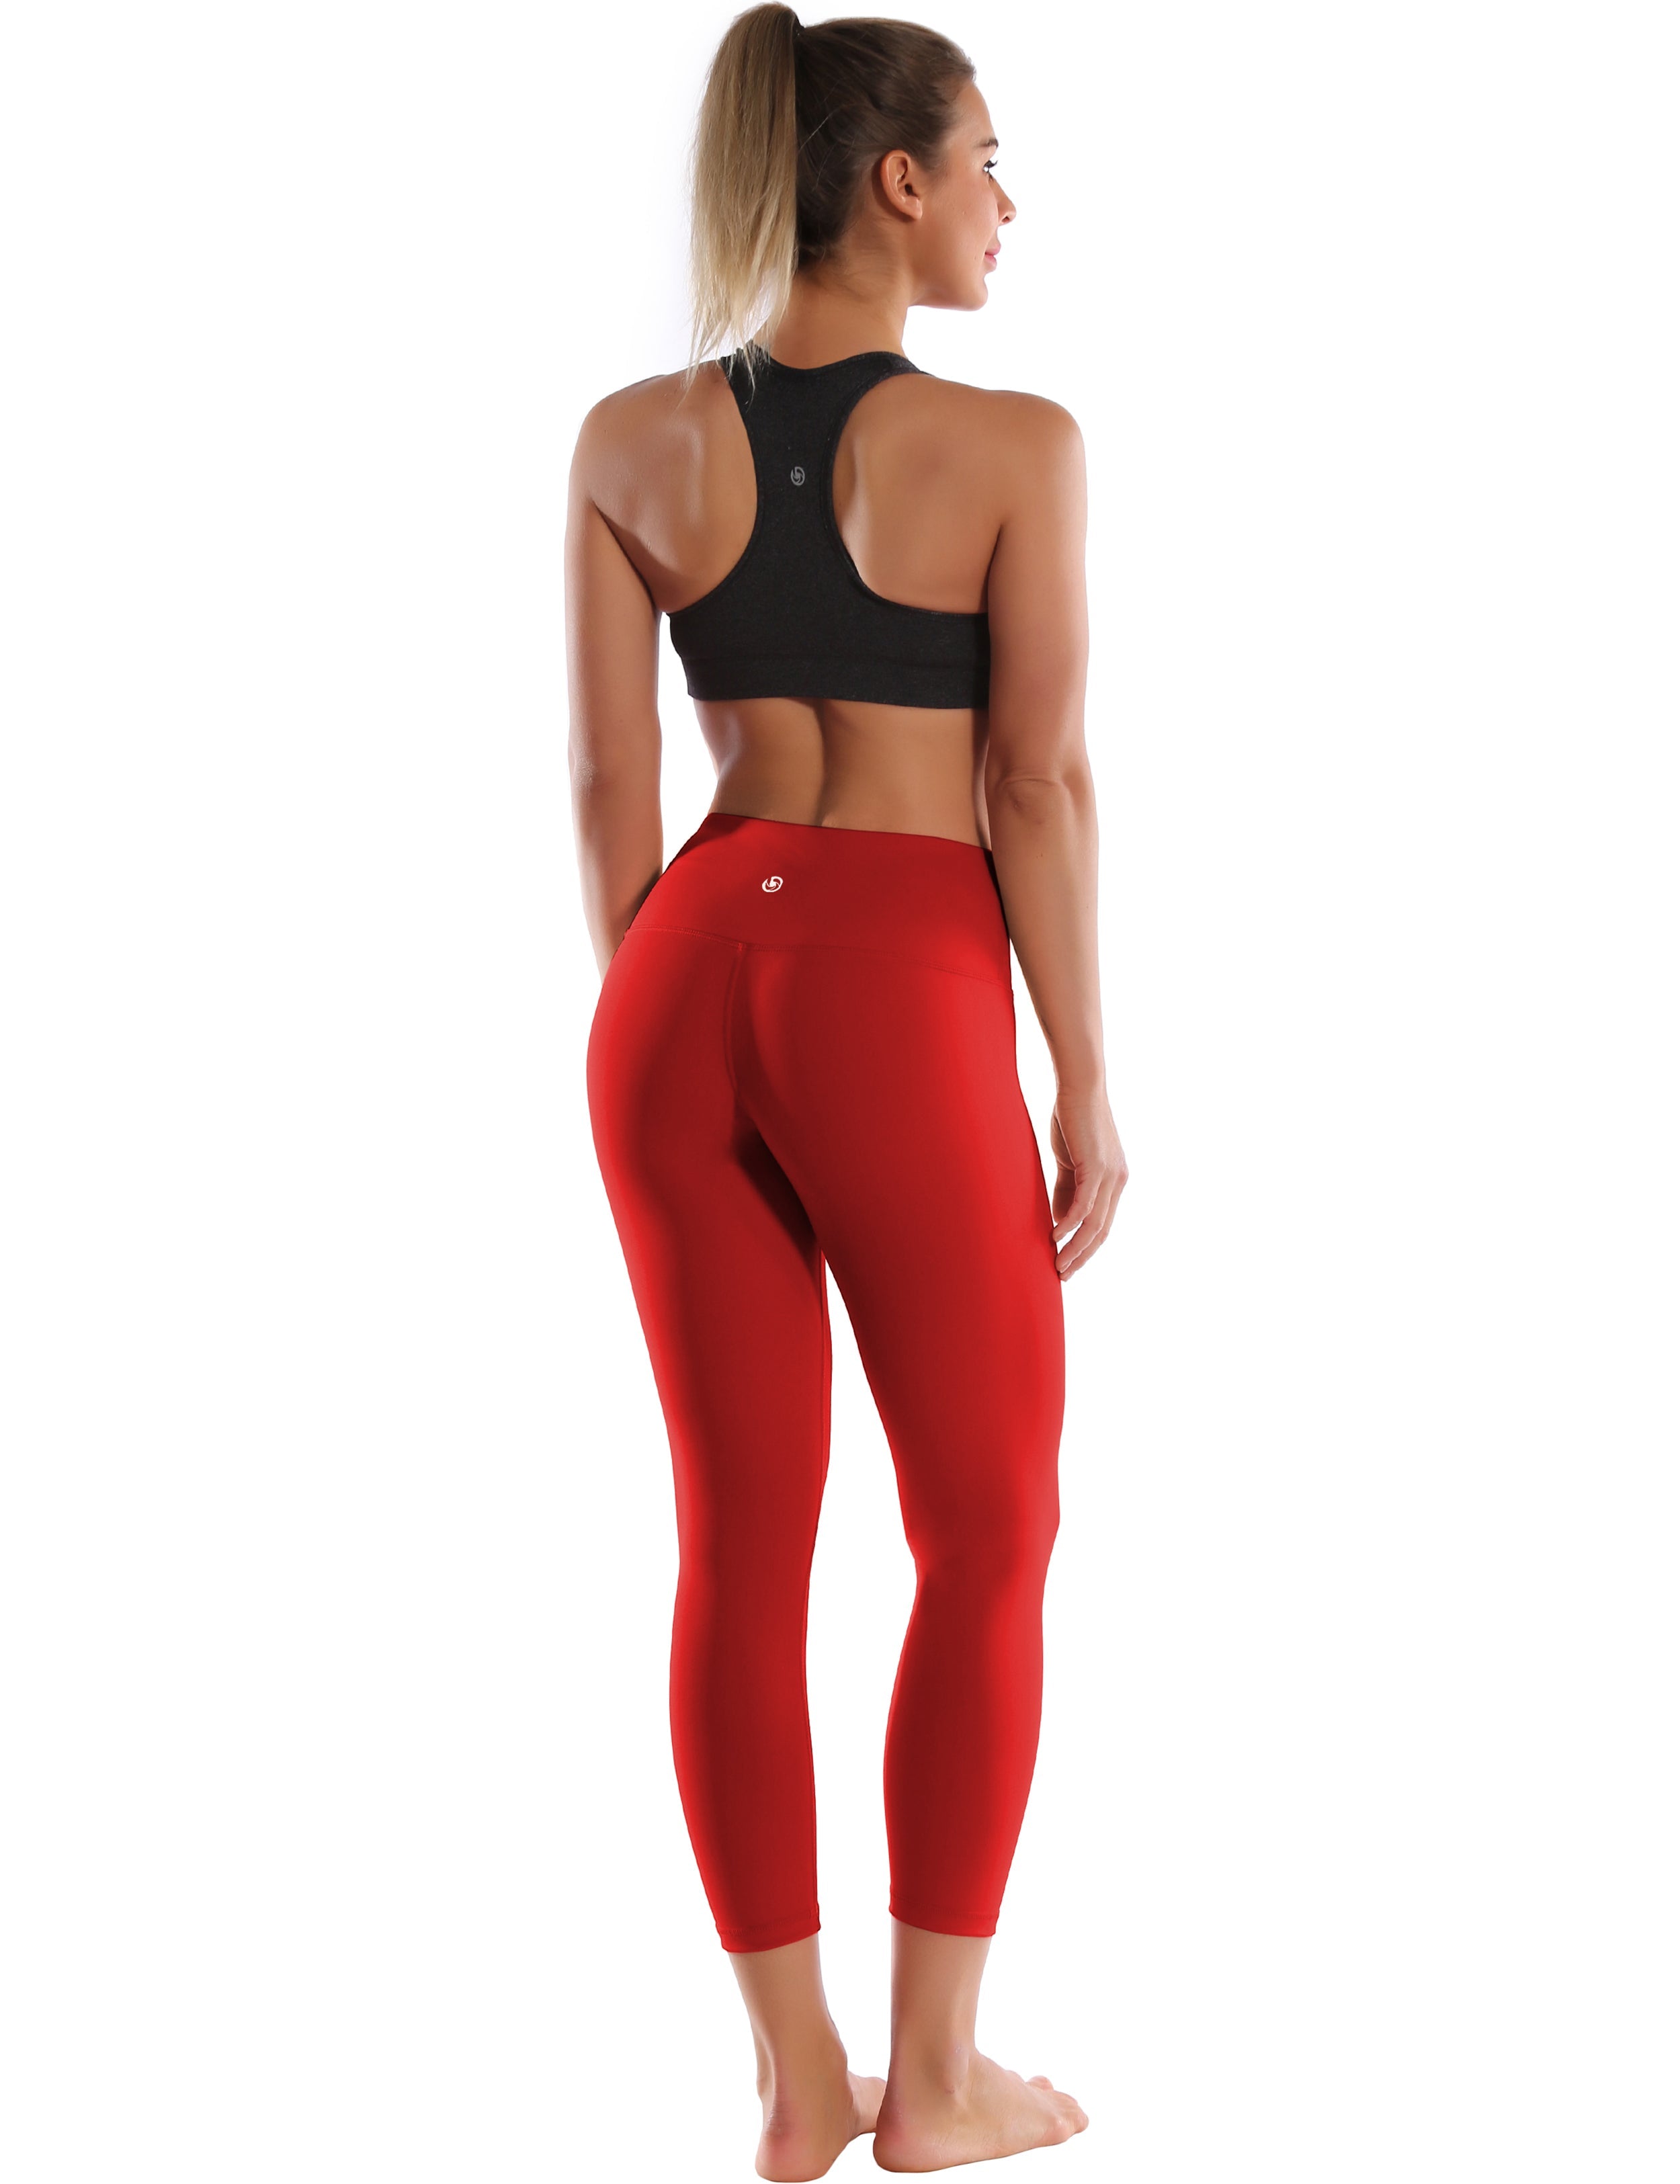 22" High Waist Crop Tight Capris scarlet 75%Nylon/25%Spandex Fabric doesn't attract lint easily 4-way stretch No see-through Moisture-wicking Tummy control Inner pocket